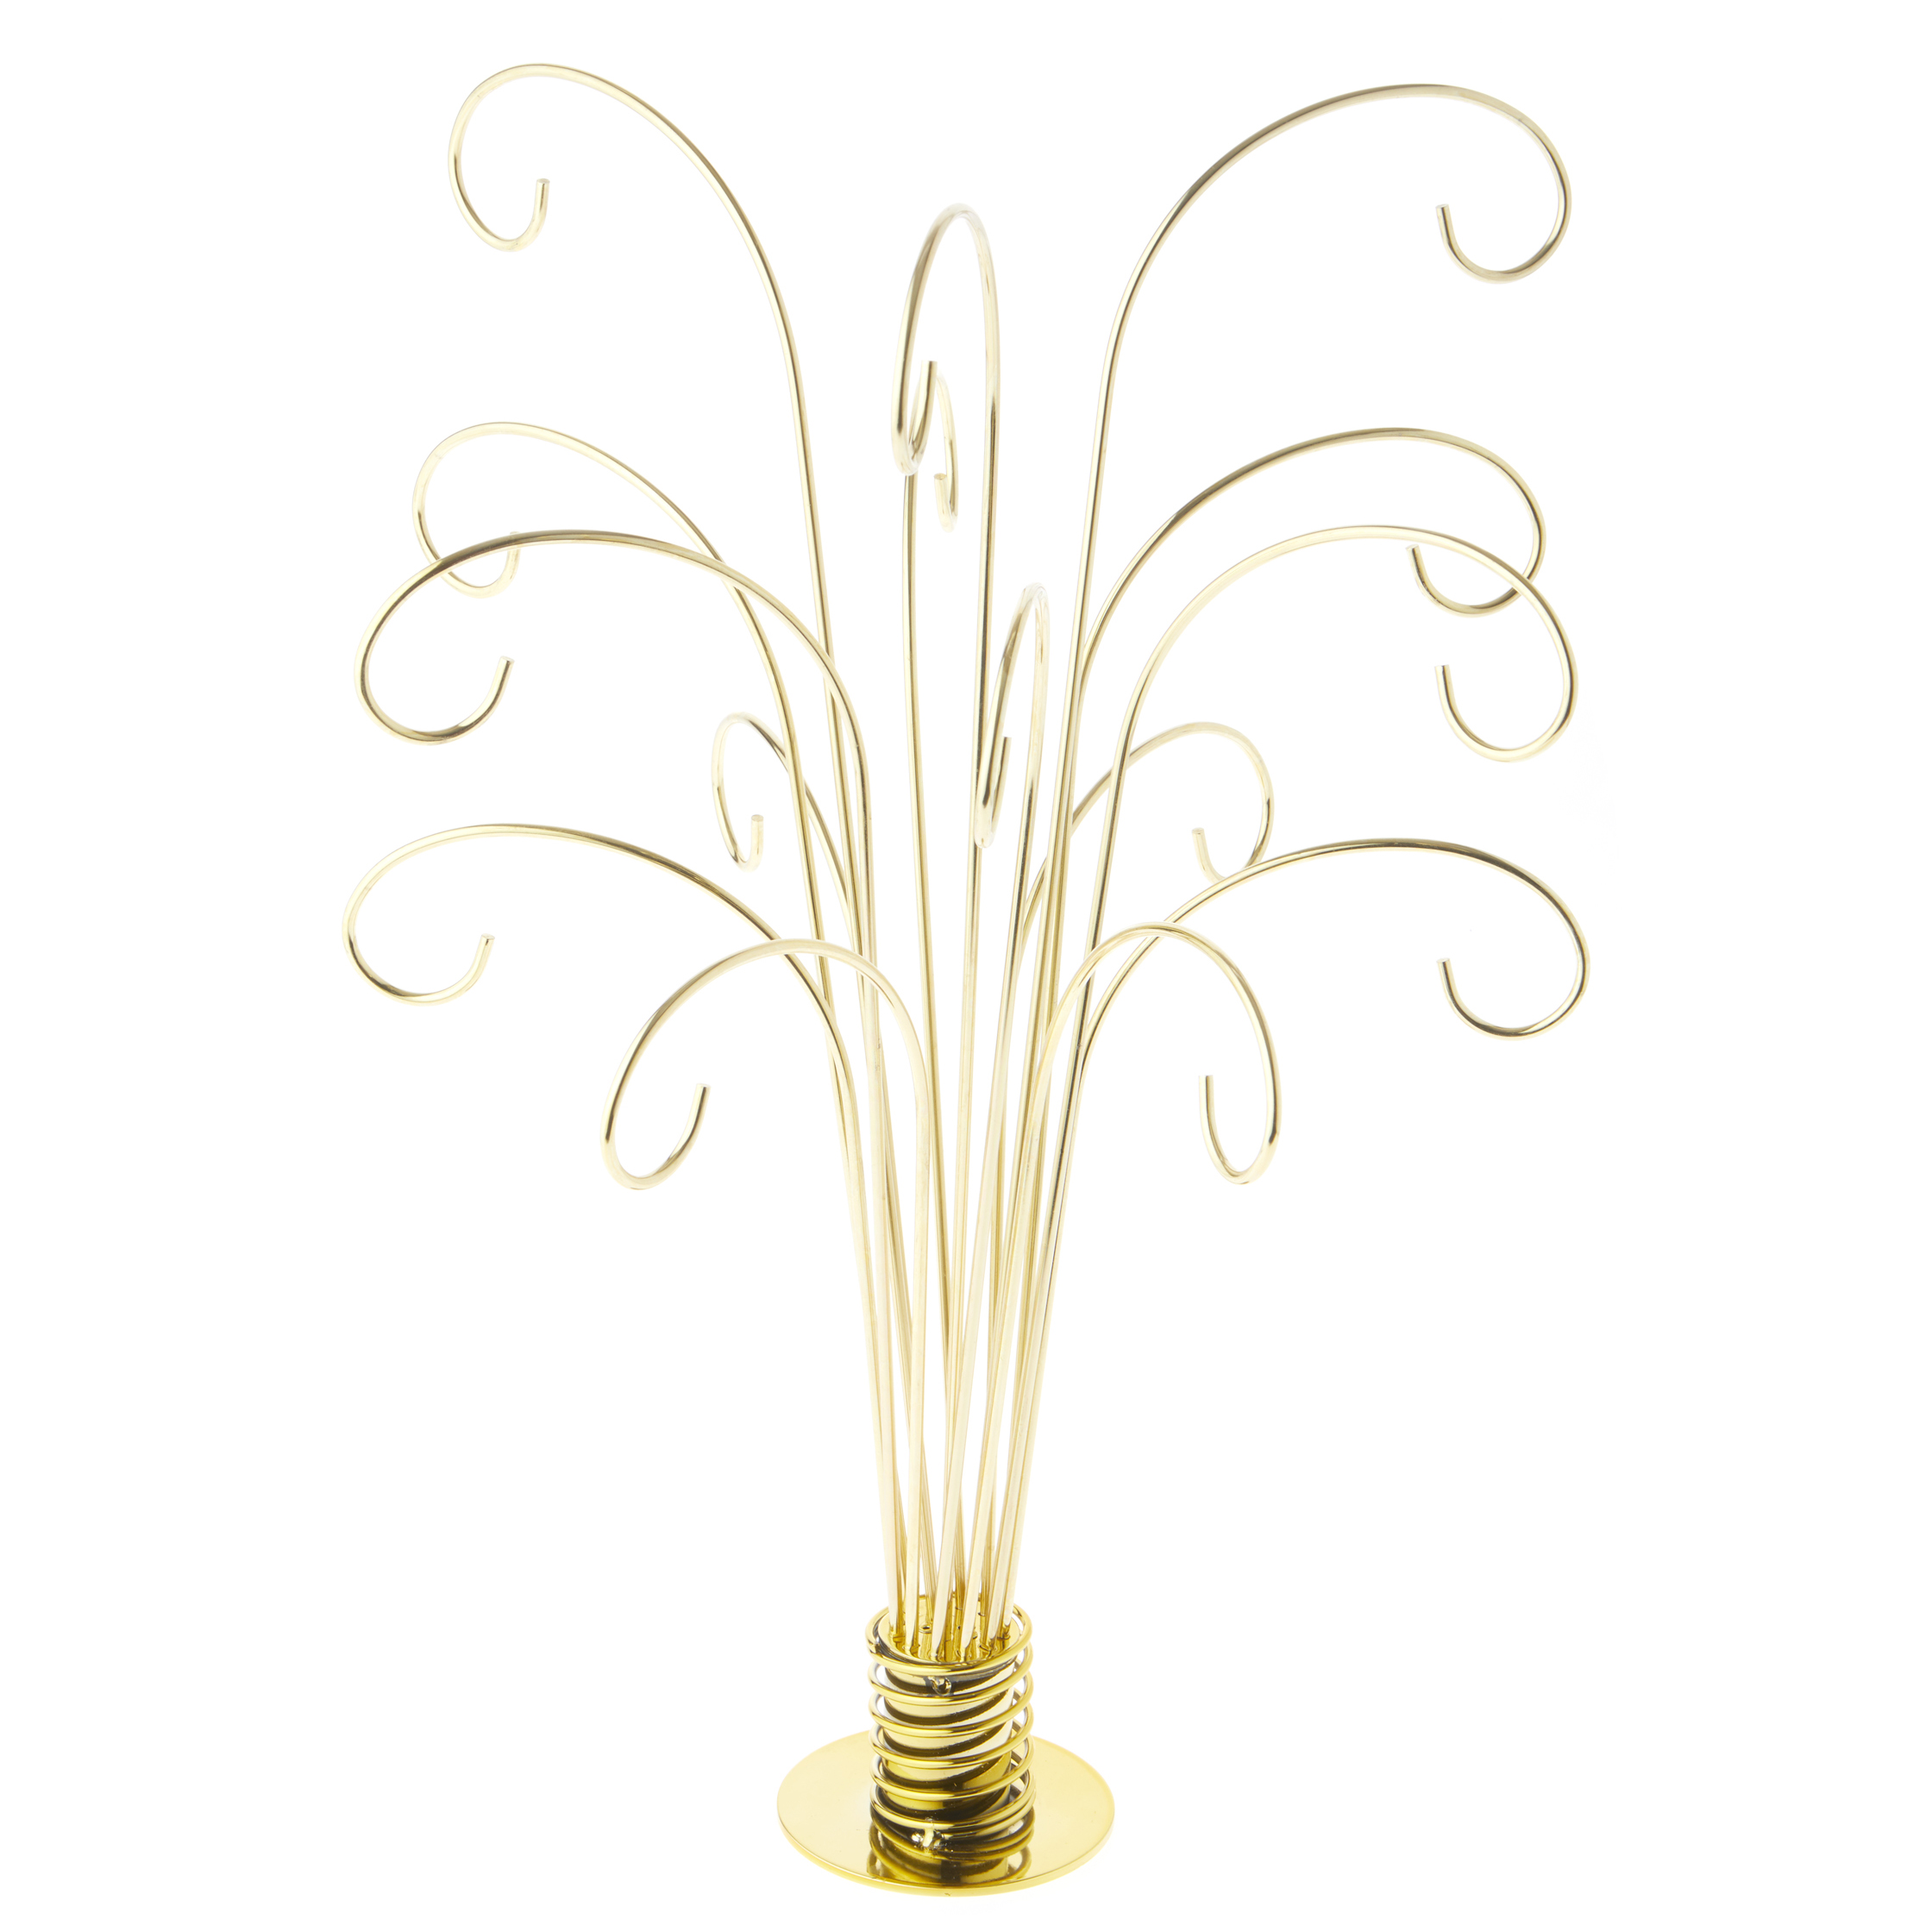 Bard's Fountain-Style Gold-toned Ornament Tree, 15 Branch, 10.5" W x 10.5" D x 20" H